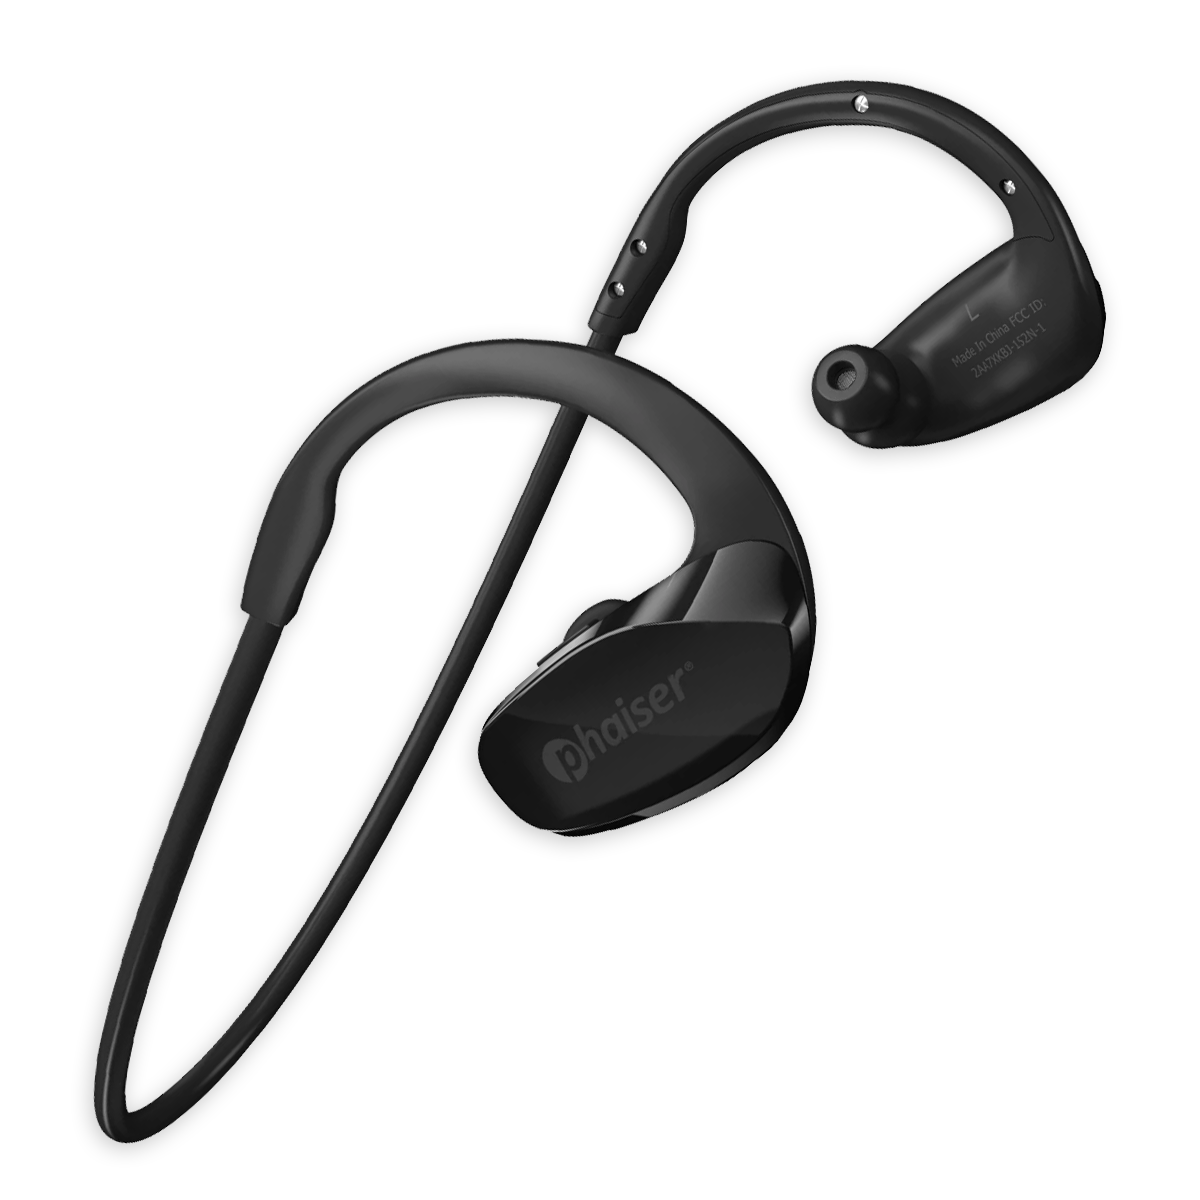 Phaiser Flexcore BHS-530 Stereo Wireless Earbuds